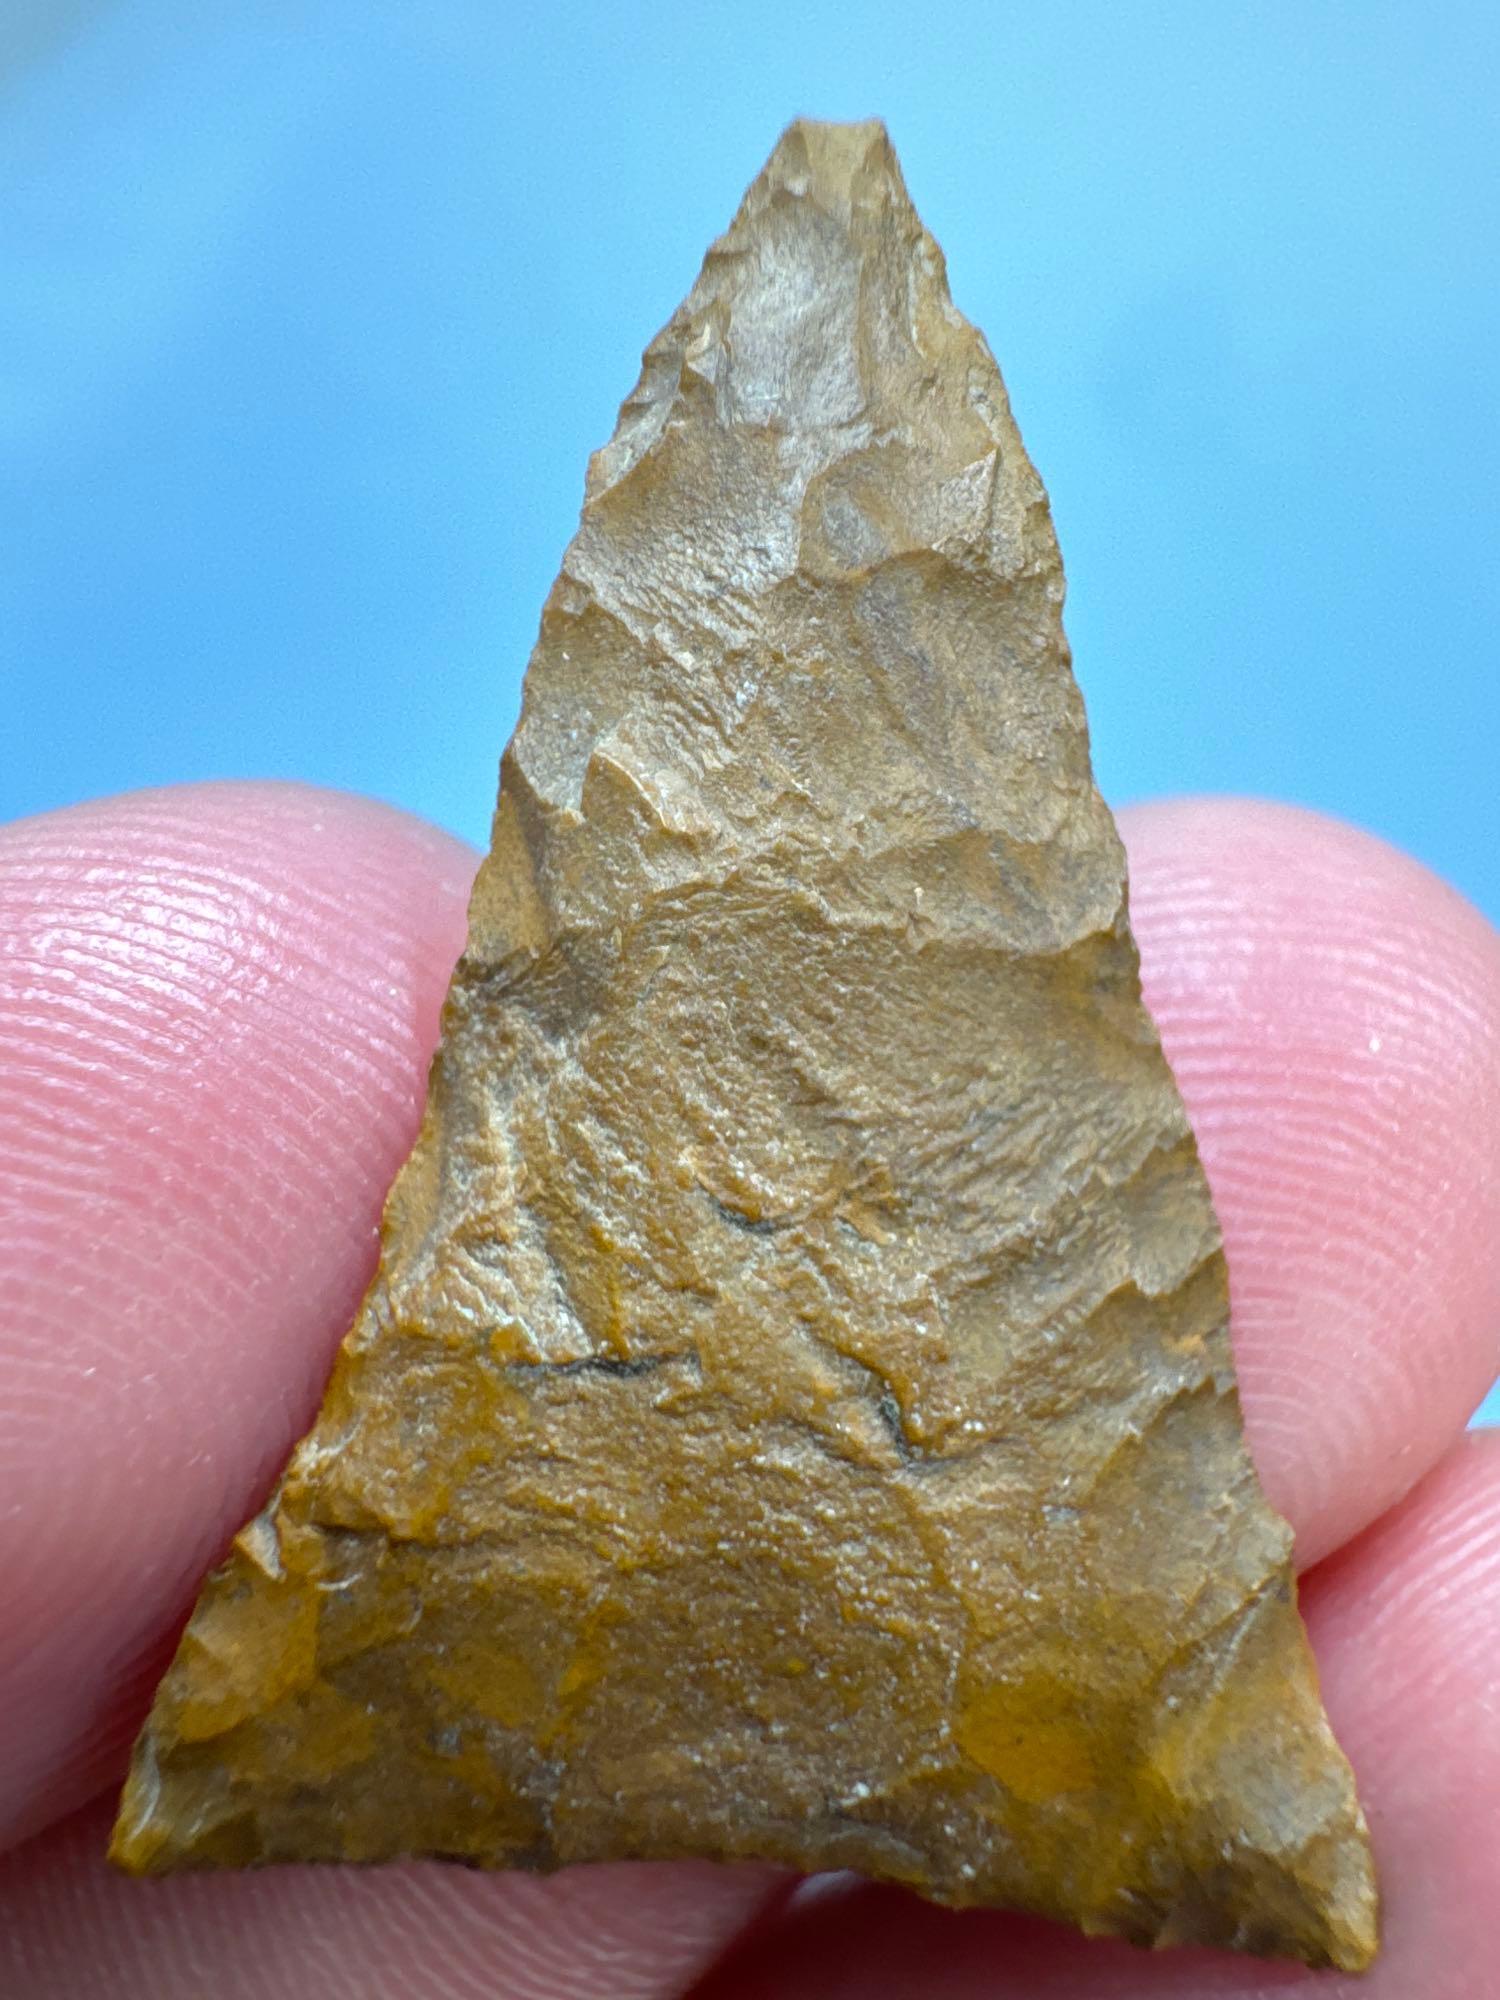 1 9/16" Jasper Triangle, Found in Burlington Co., New Jersey, Purchased from Rich Johnston